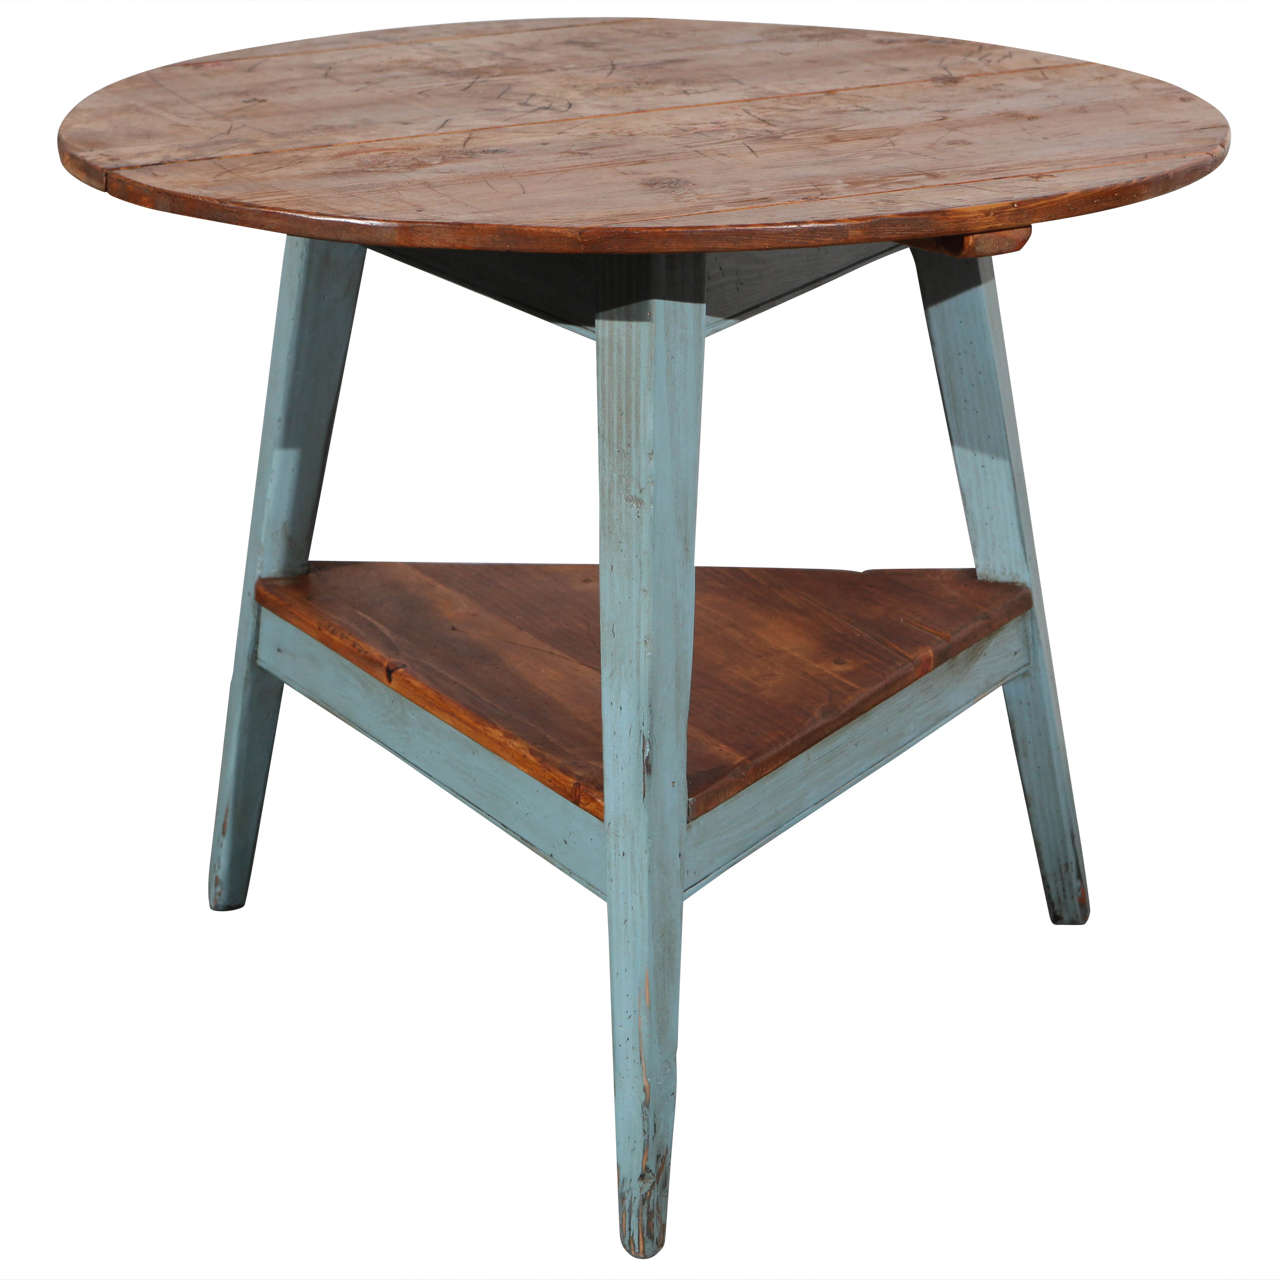 English Cricket Table with Blue Painted Legs